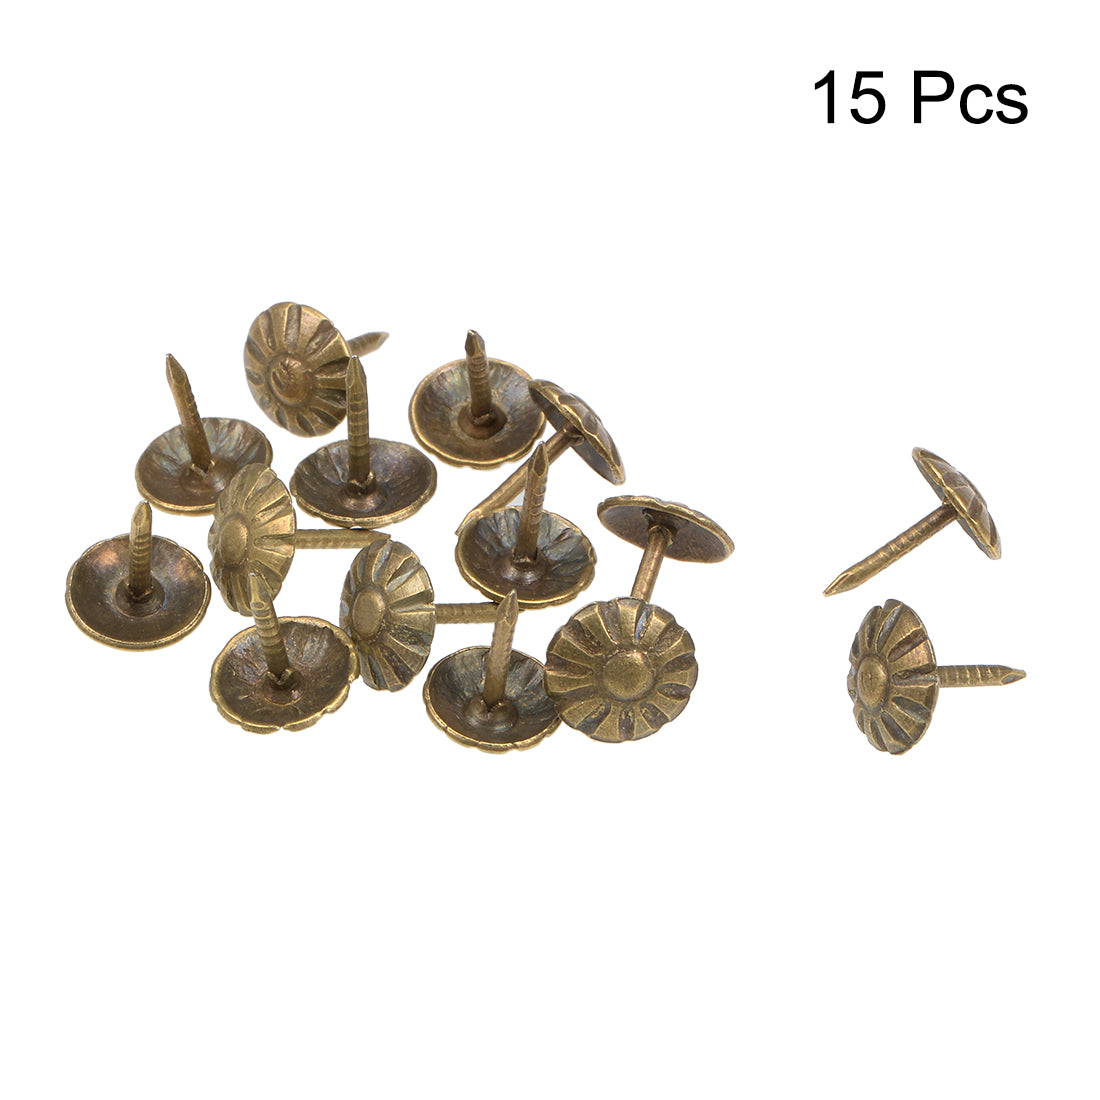 uxcell Uxcell Upholstery Nails Tacks 8mm Head Dia Antique Round Thumb Push Pins Bronze Tone 15 Pcs